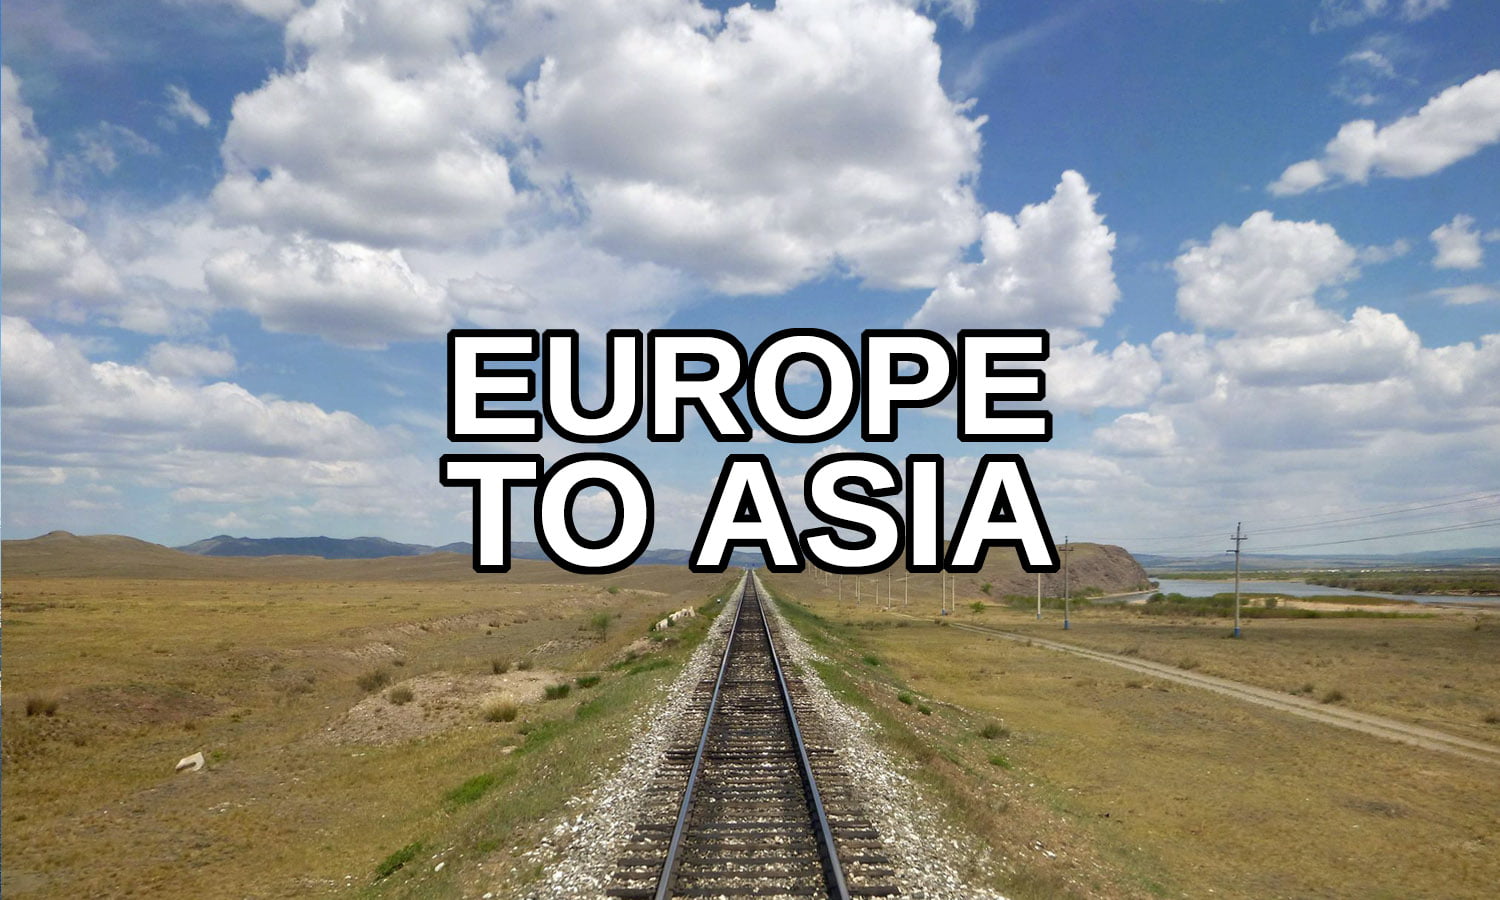 From Europe to Asia by train and ship